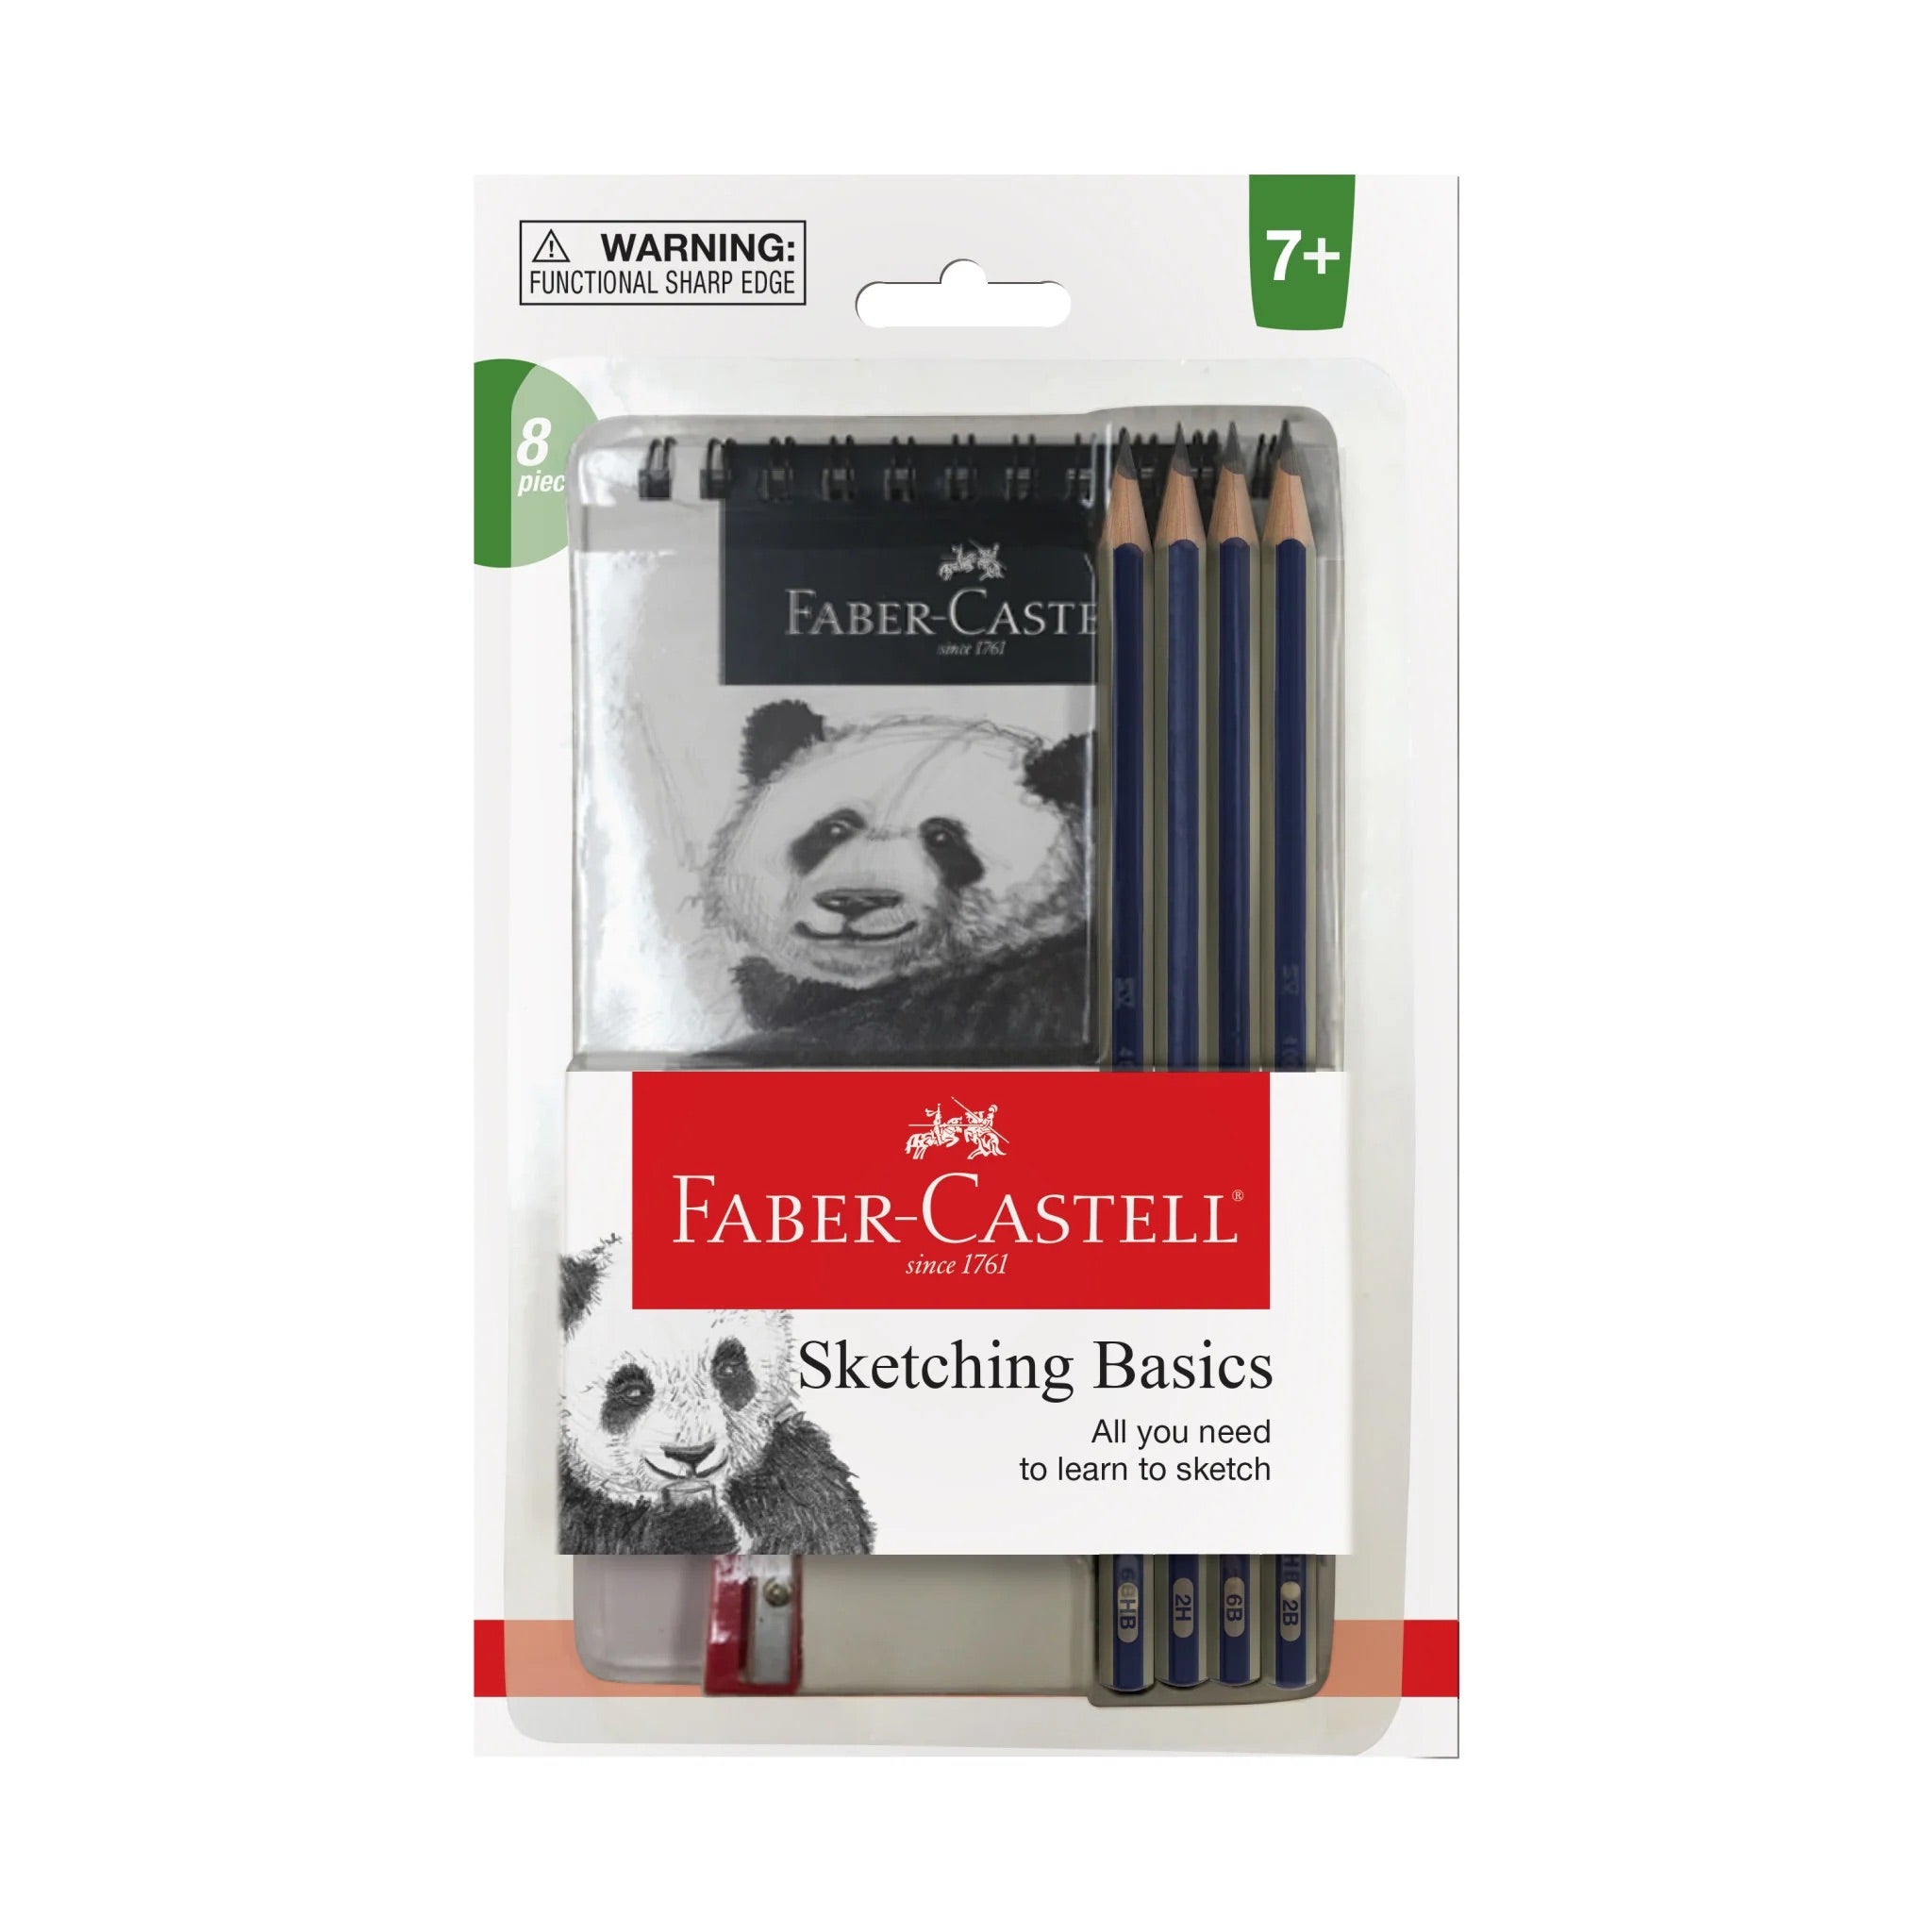 Sketching Basics by Faber-Castell #14354